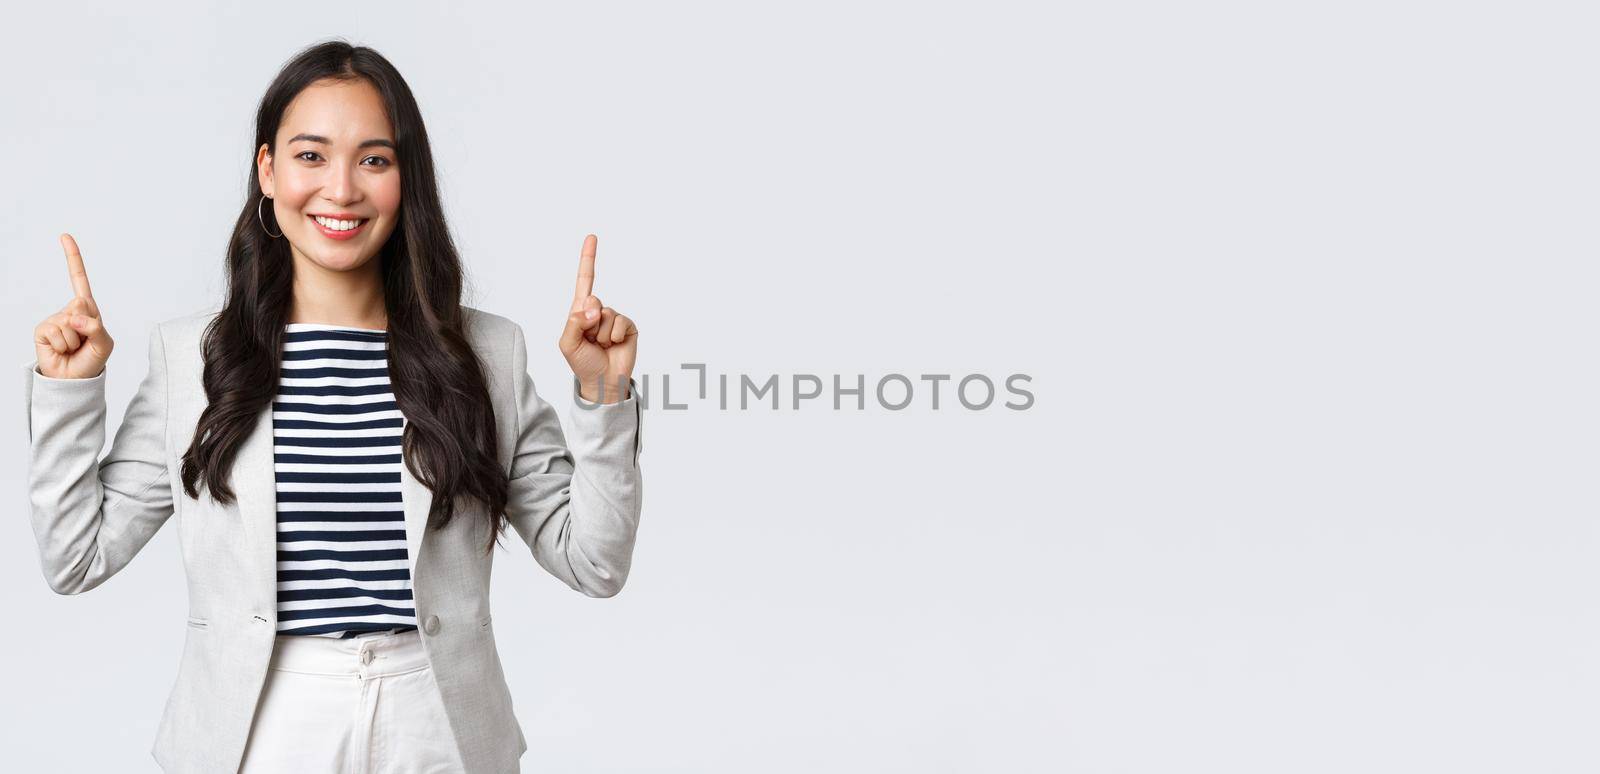 Business, finance and employment, female successful entrepreneurs concept. Successful confident smiling asian businesswoman pointing fingers up, real estate worker showing perfect proposal.